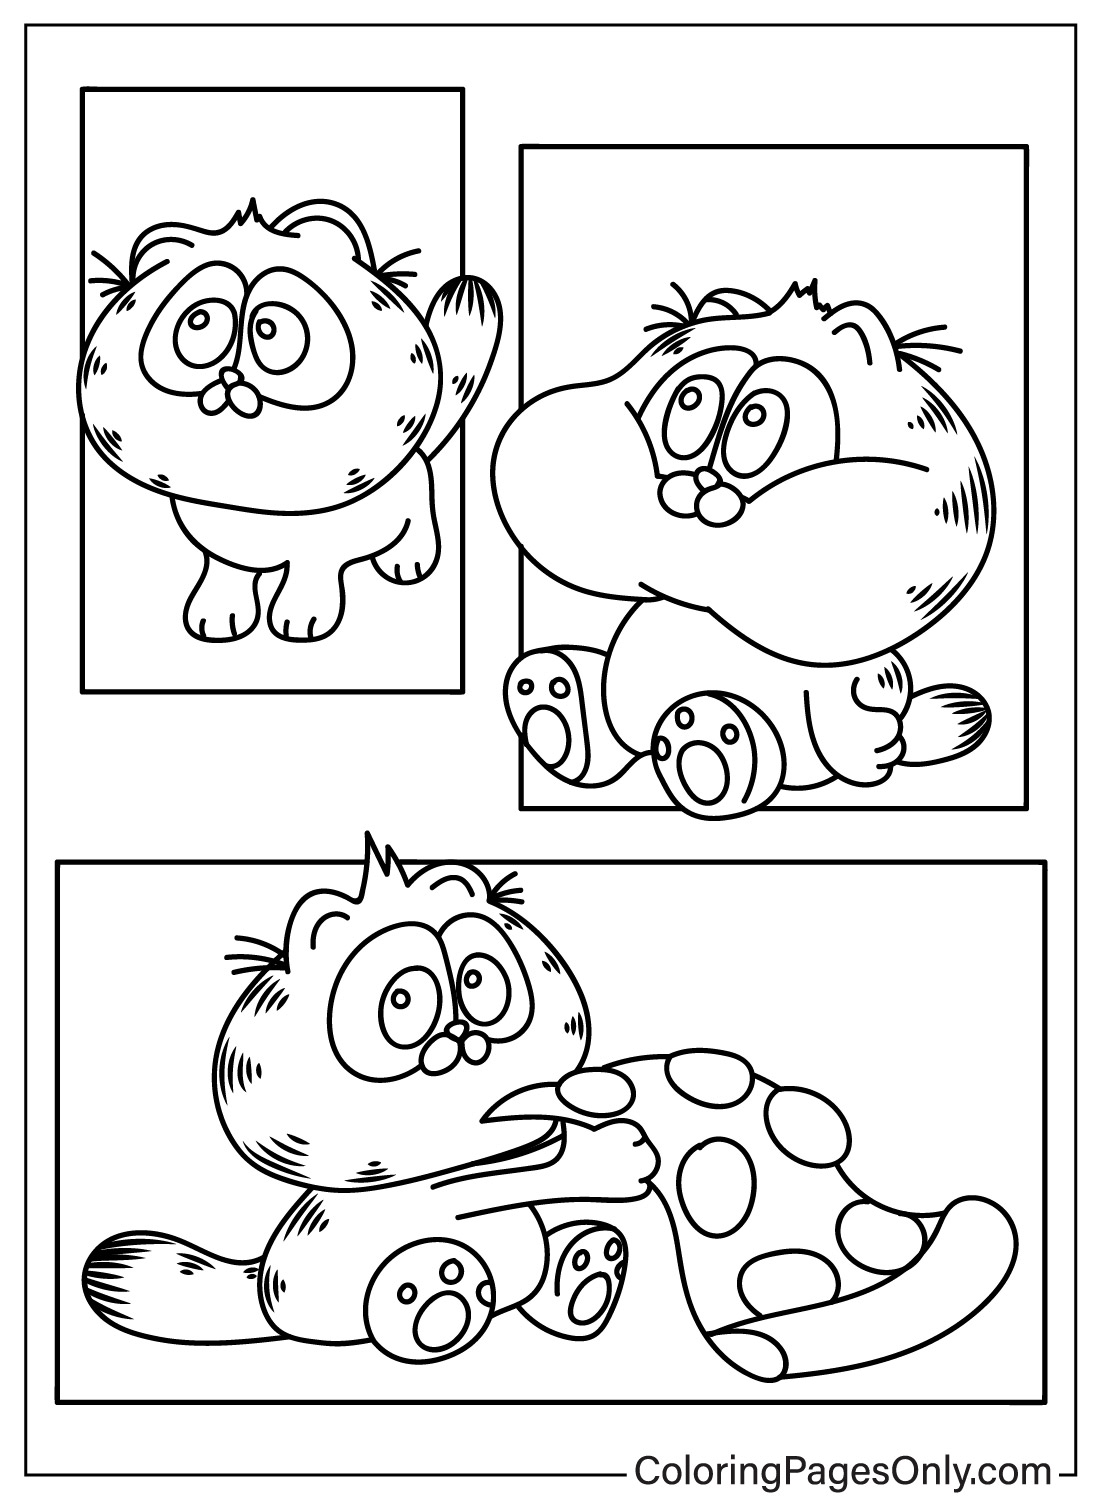 Cute Garfield Coloring Page from Garfield